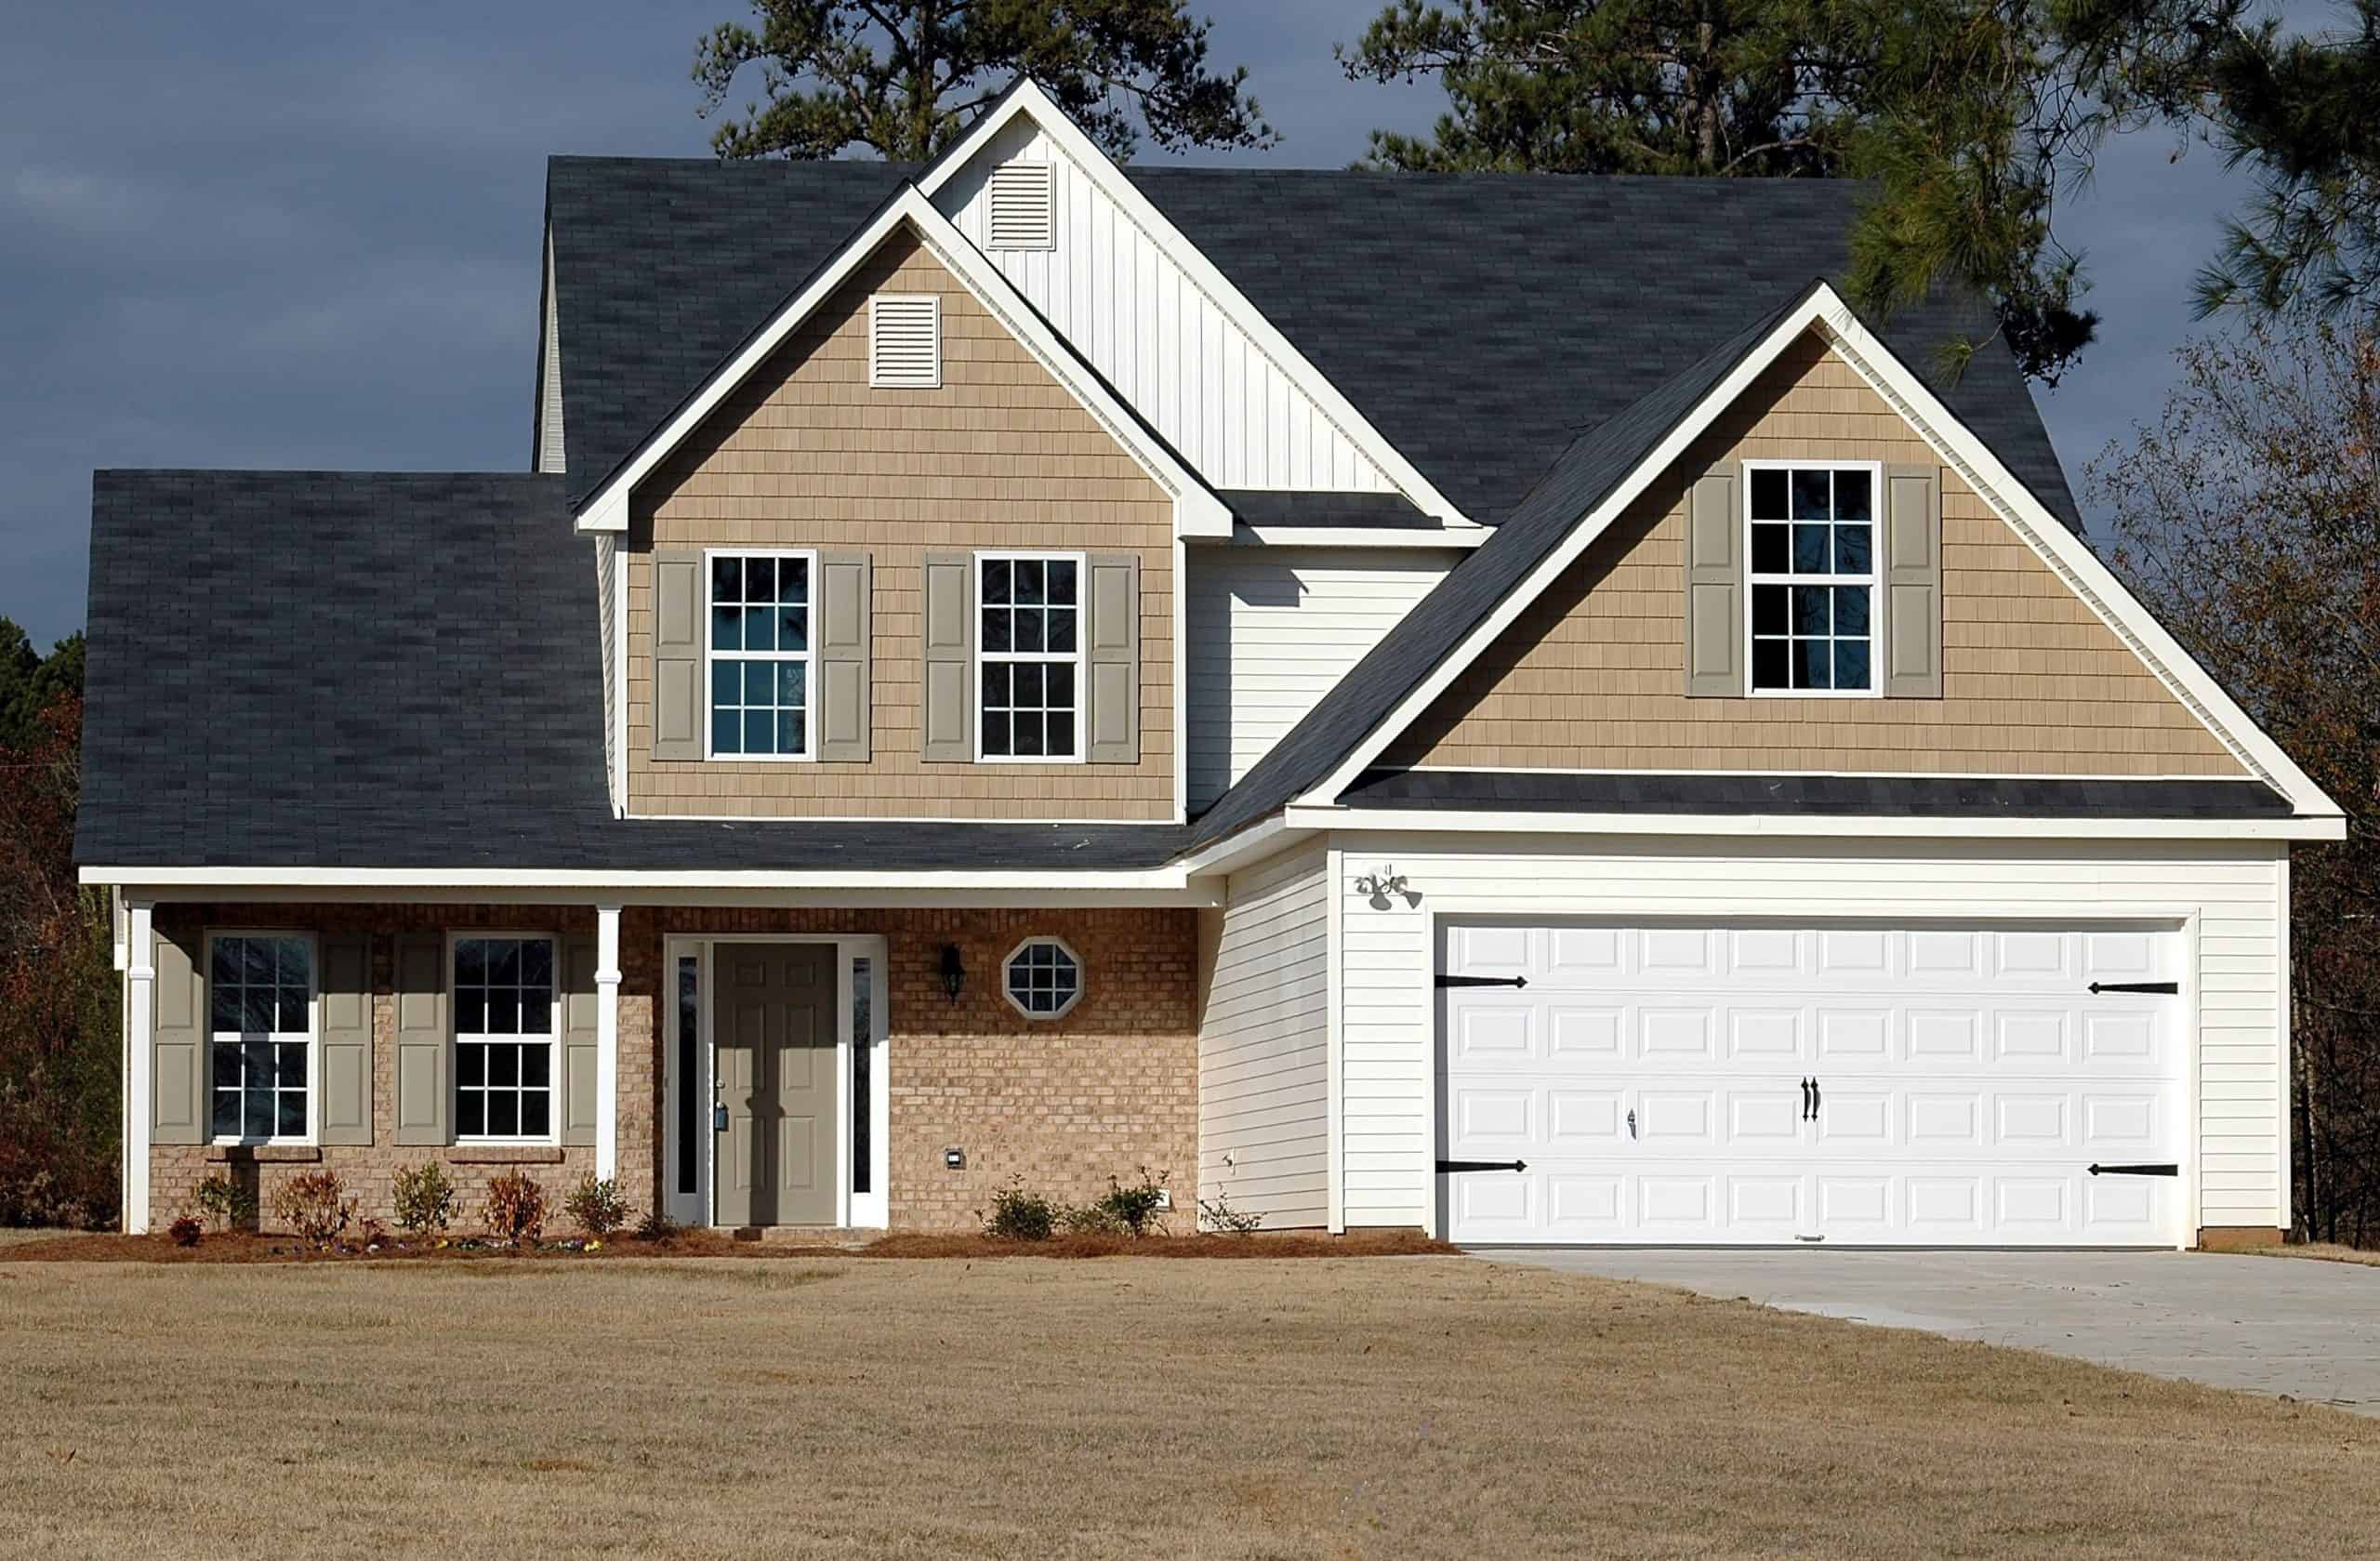 What to do When Your Garage Door Won’t Close?